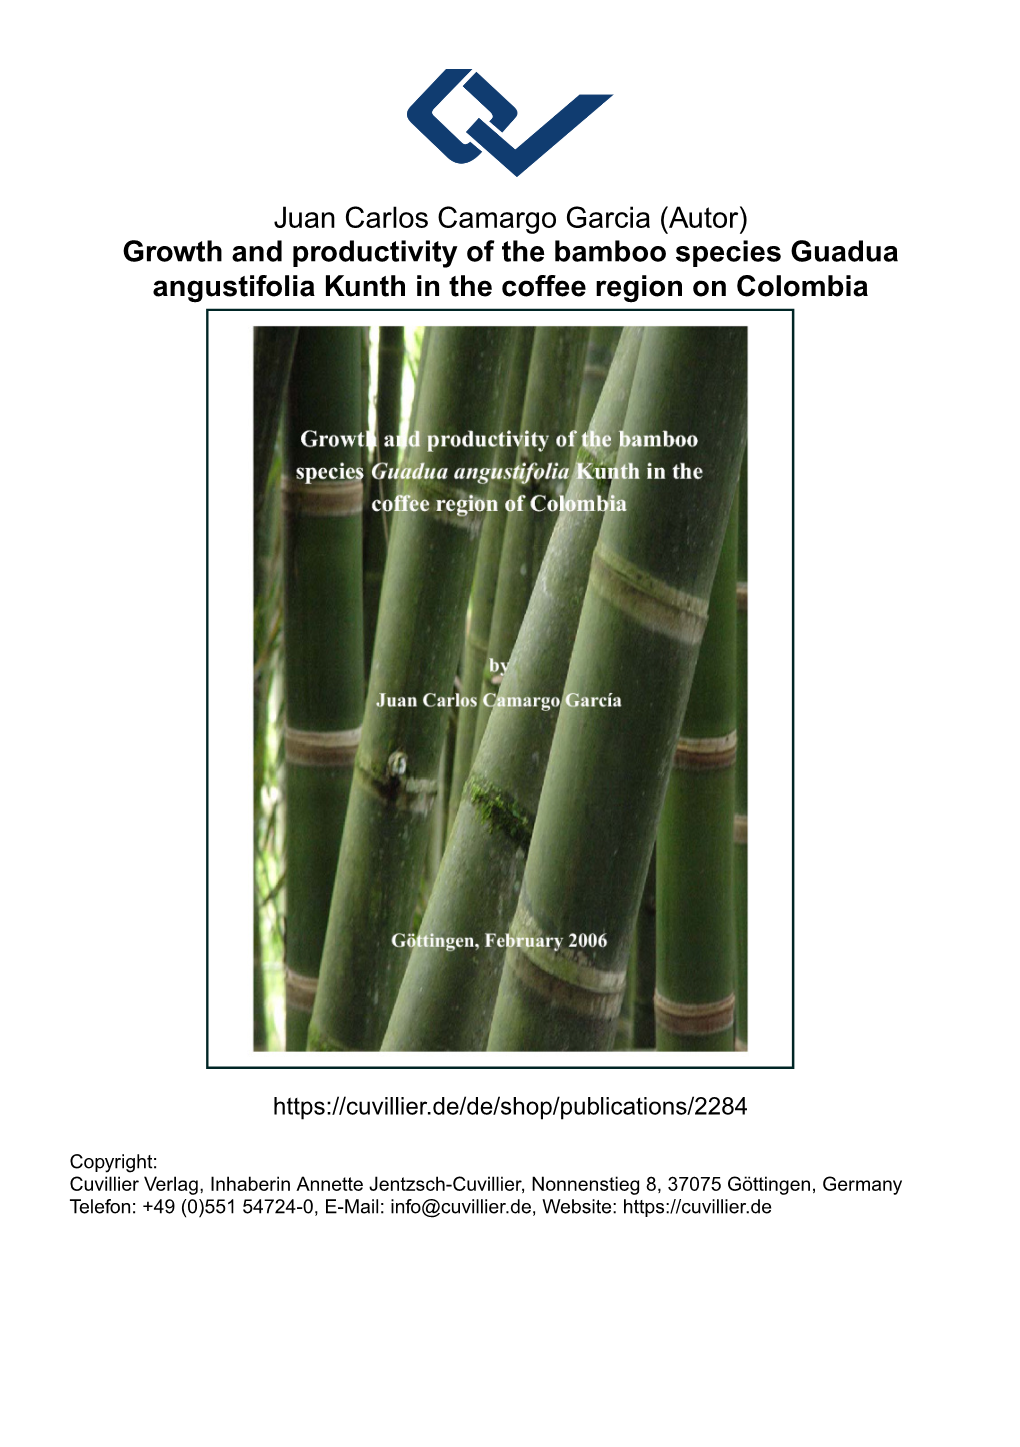 Growth and Productivity of the Bamboo Species Guadua Angustifolia Kunth in the Coffee Region on Colombia